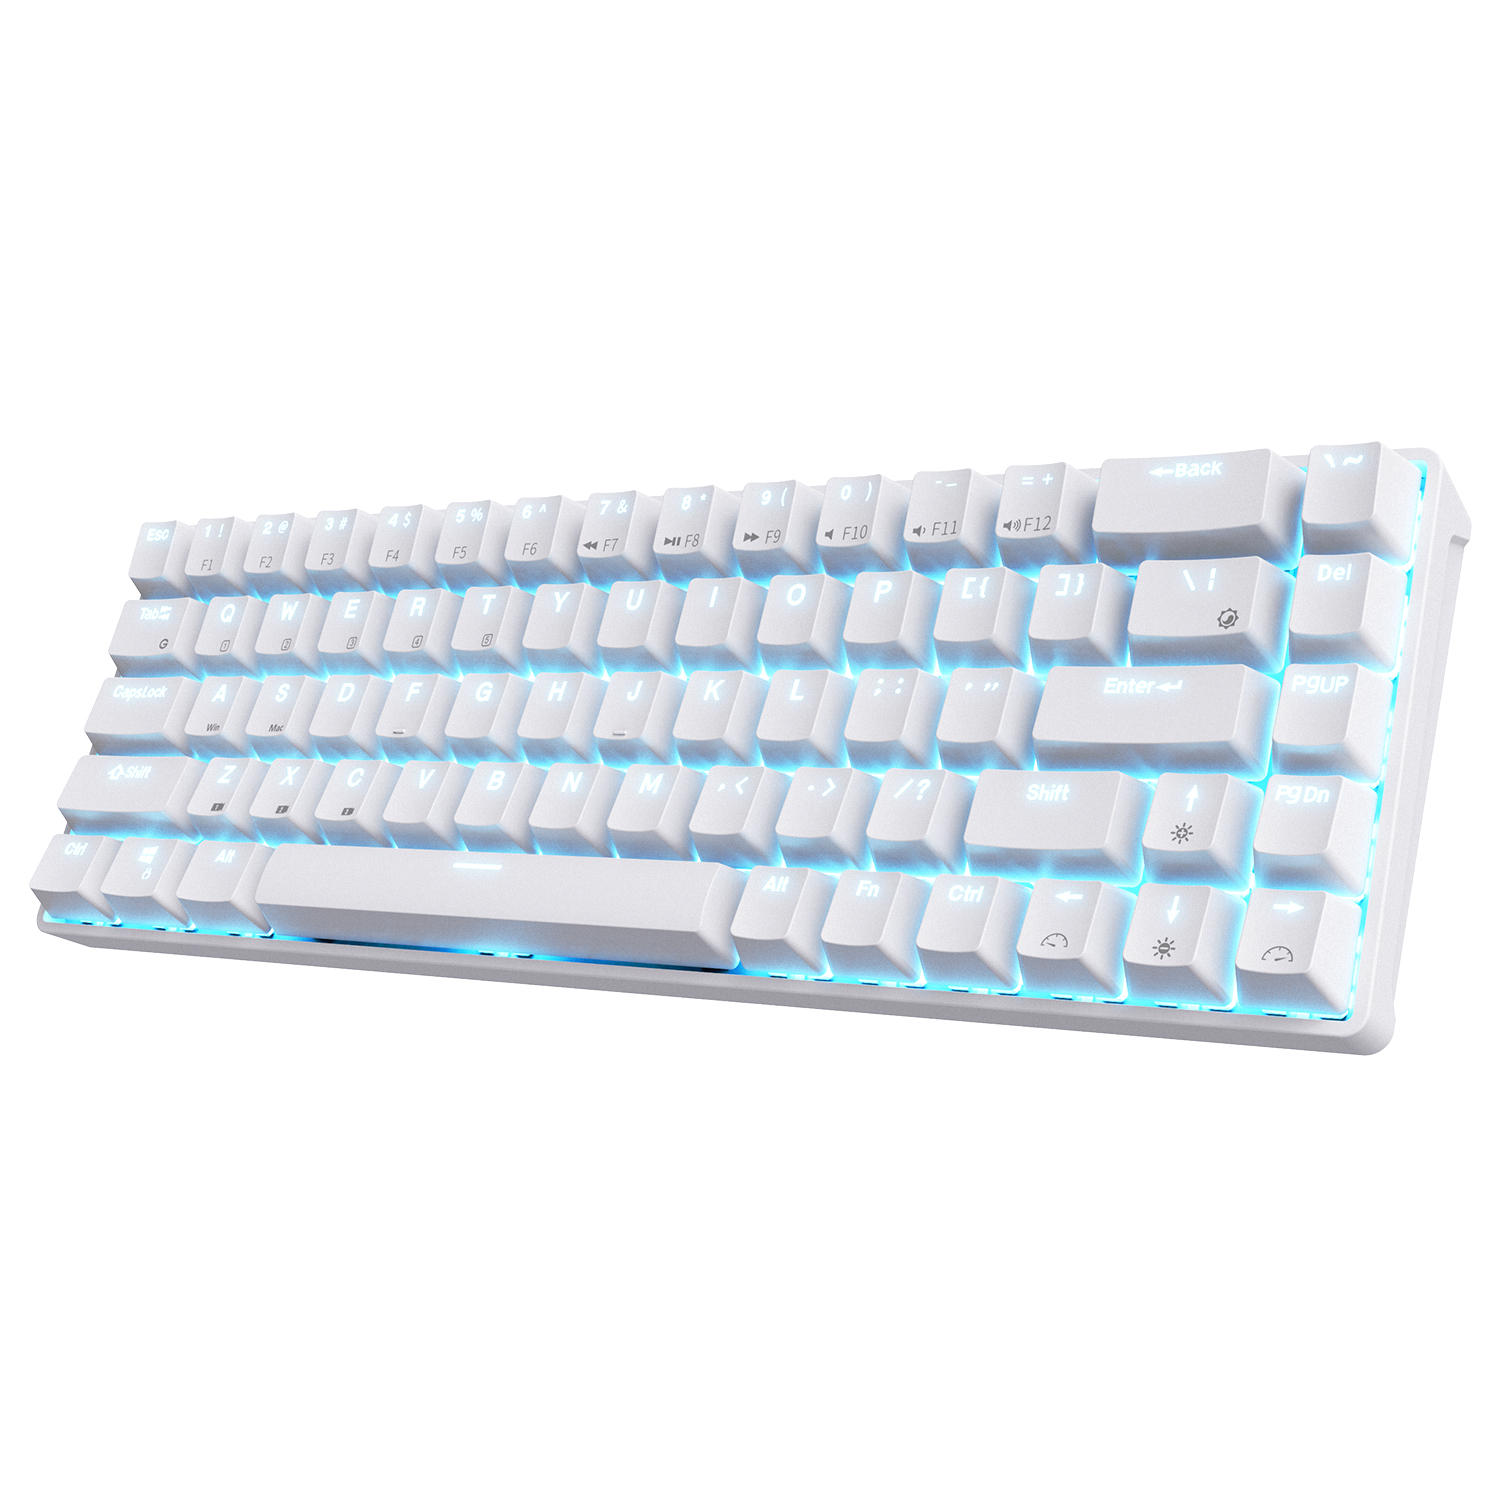 RK ROYAL KLUDGE RK68 65% Hot-Swappable Wireless Mechanical Keyboard, Red Switch